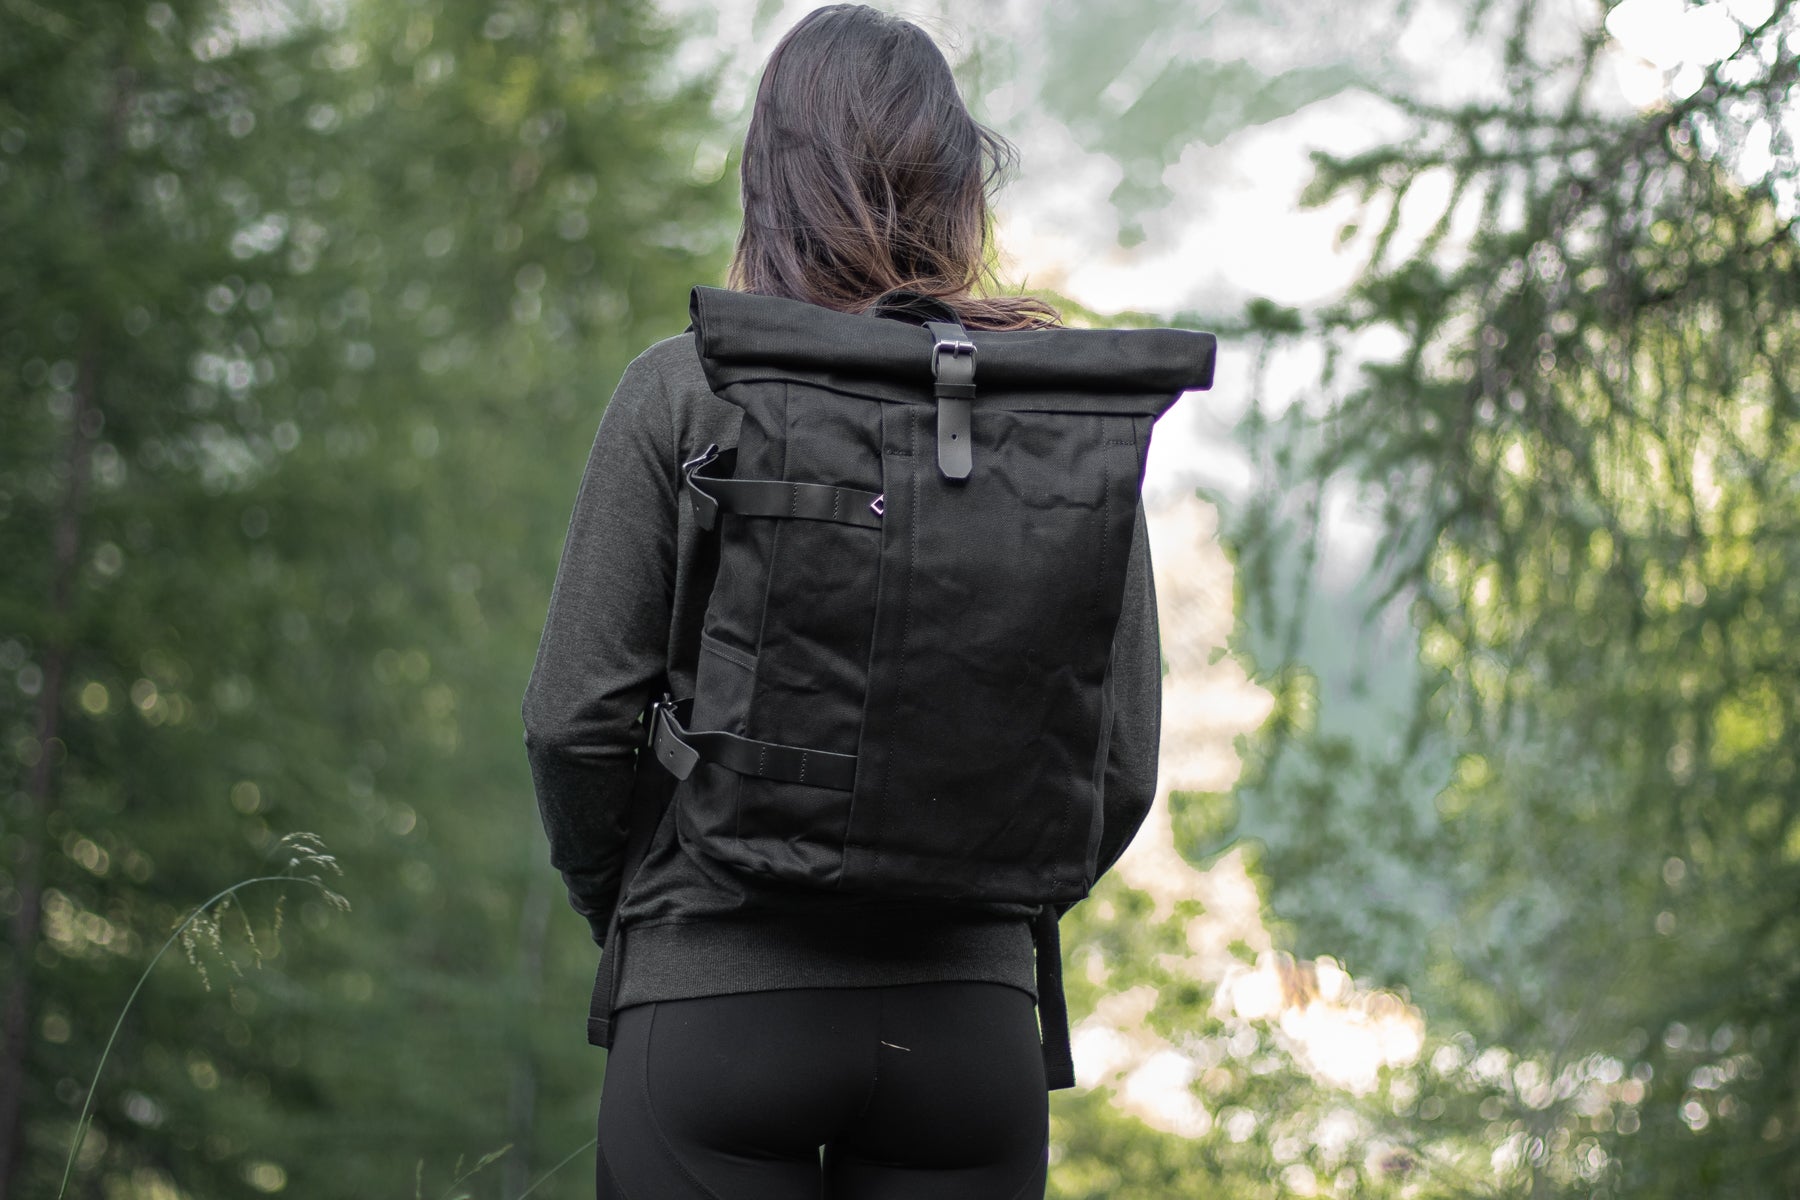 commuter laptop day pack, ideal to store tablets, footwear and apparel